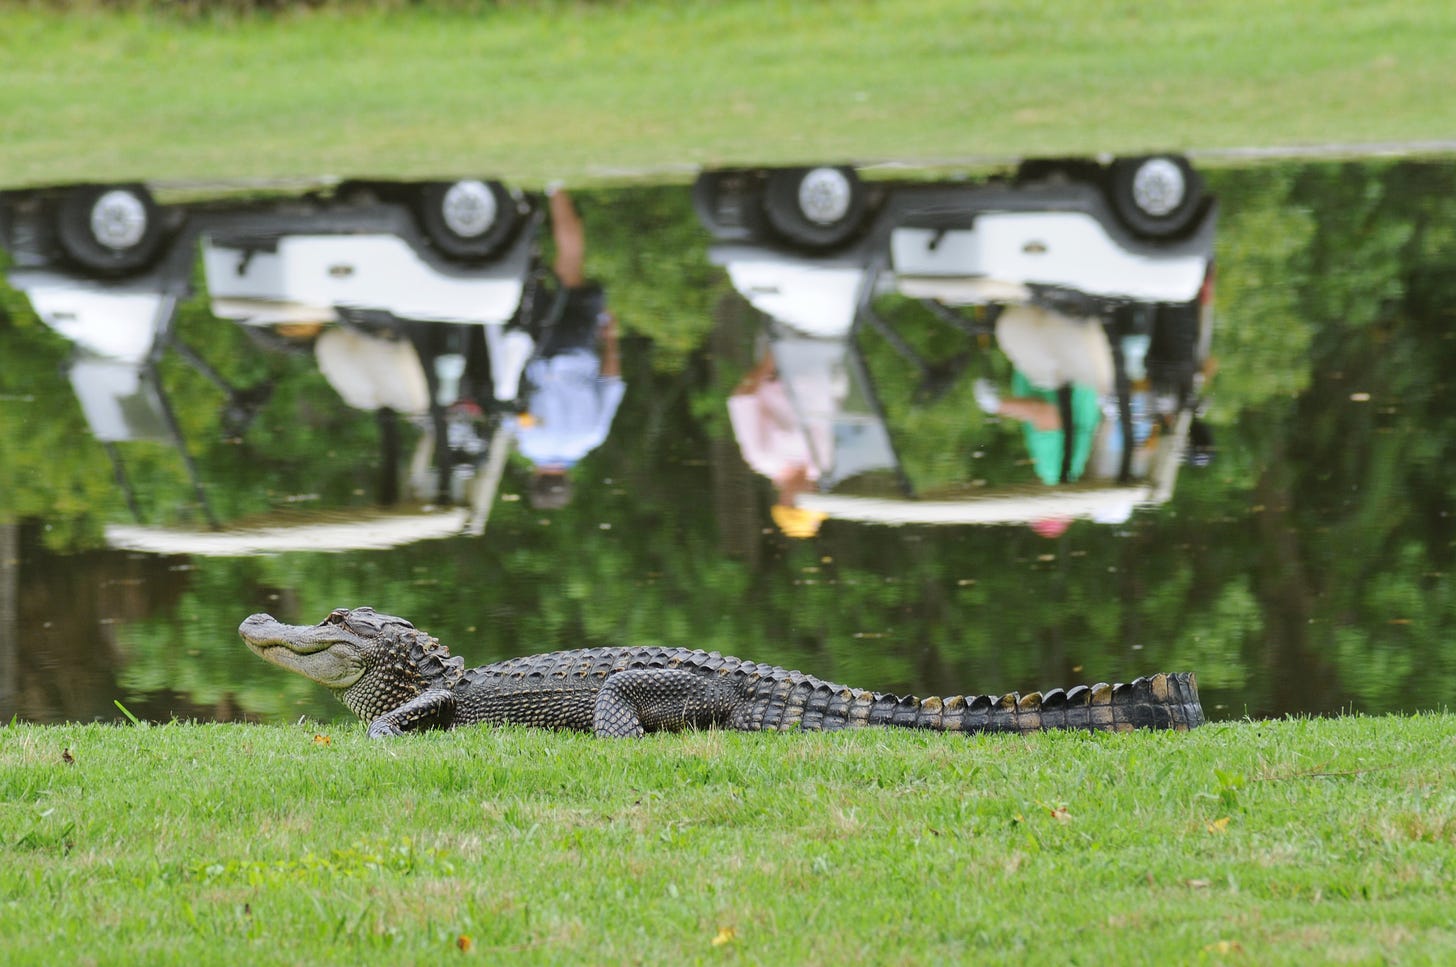 Reflection in a pond of golf carts and pastel clad golfers with a medium sized alligator next to the pond. I'm no expert on alligator sizes, but I'm calling medium